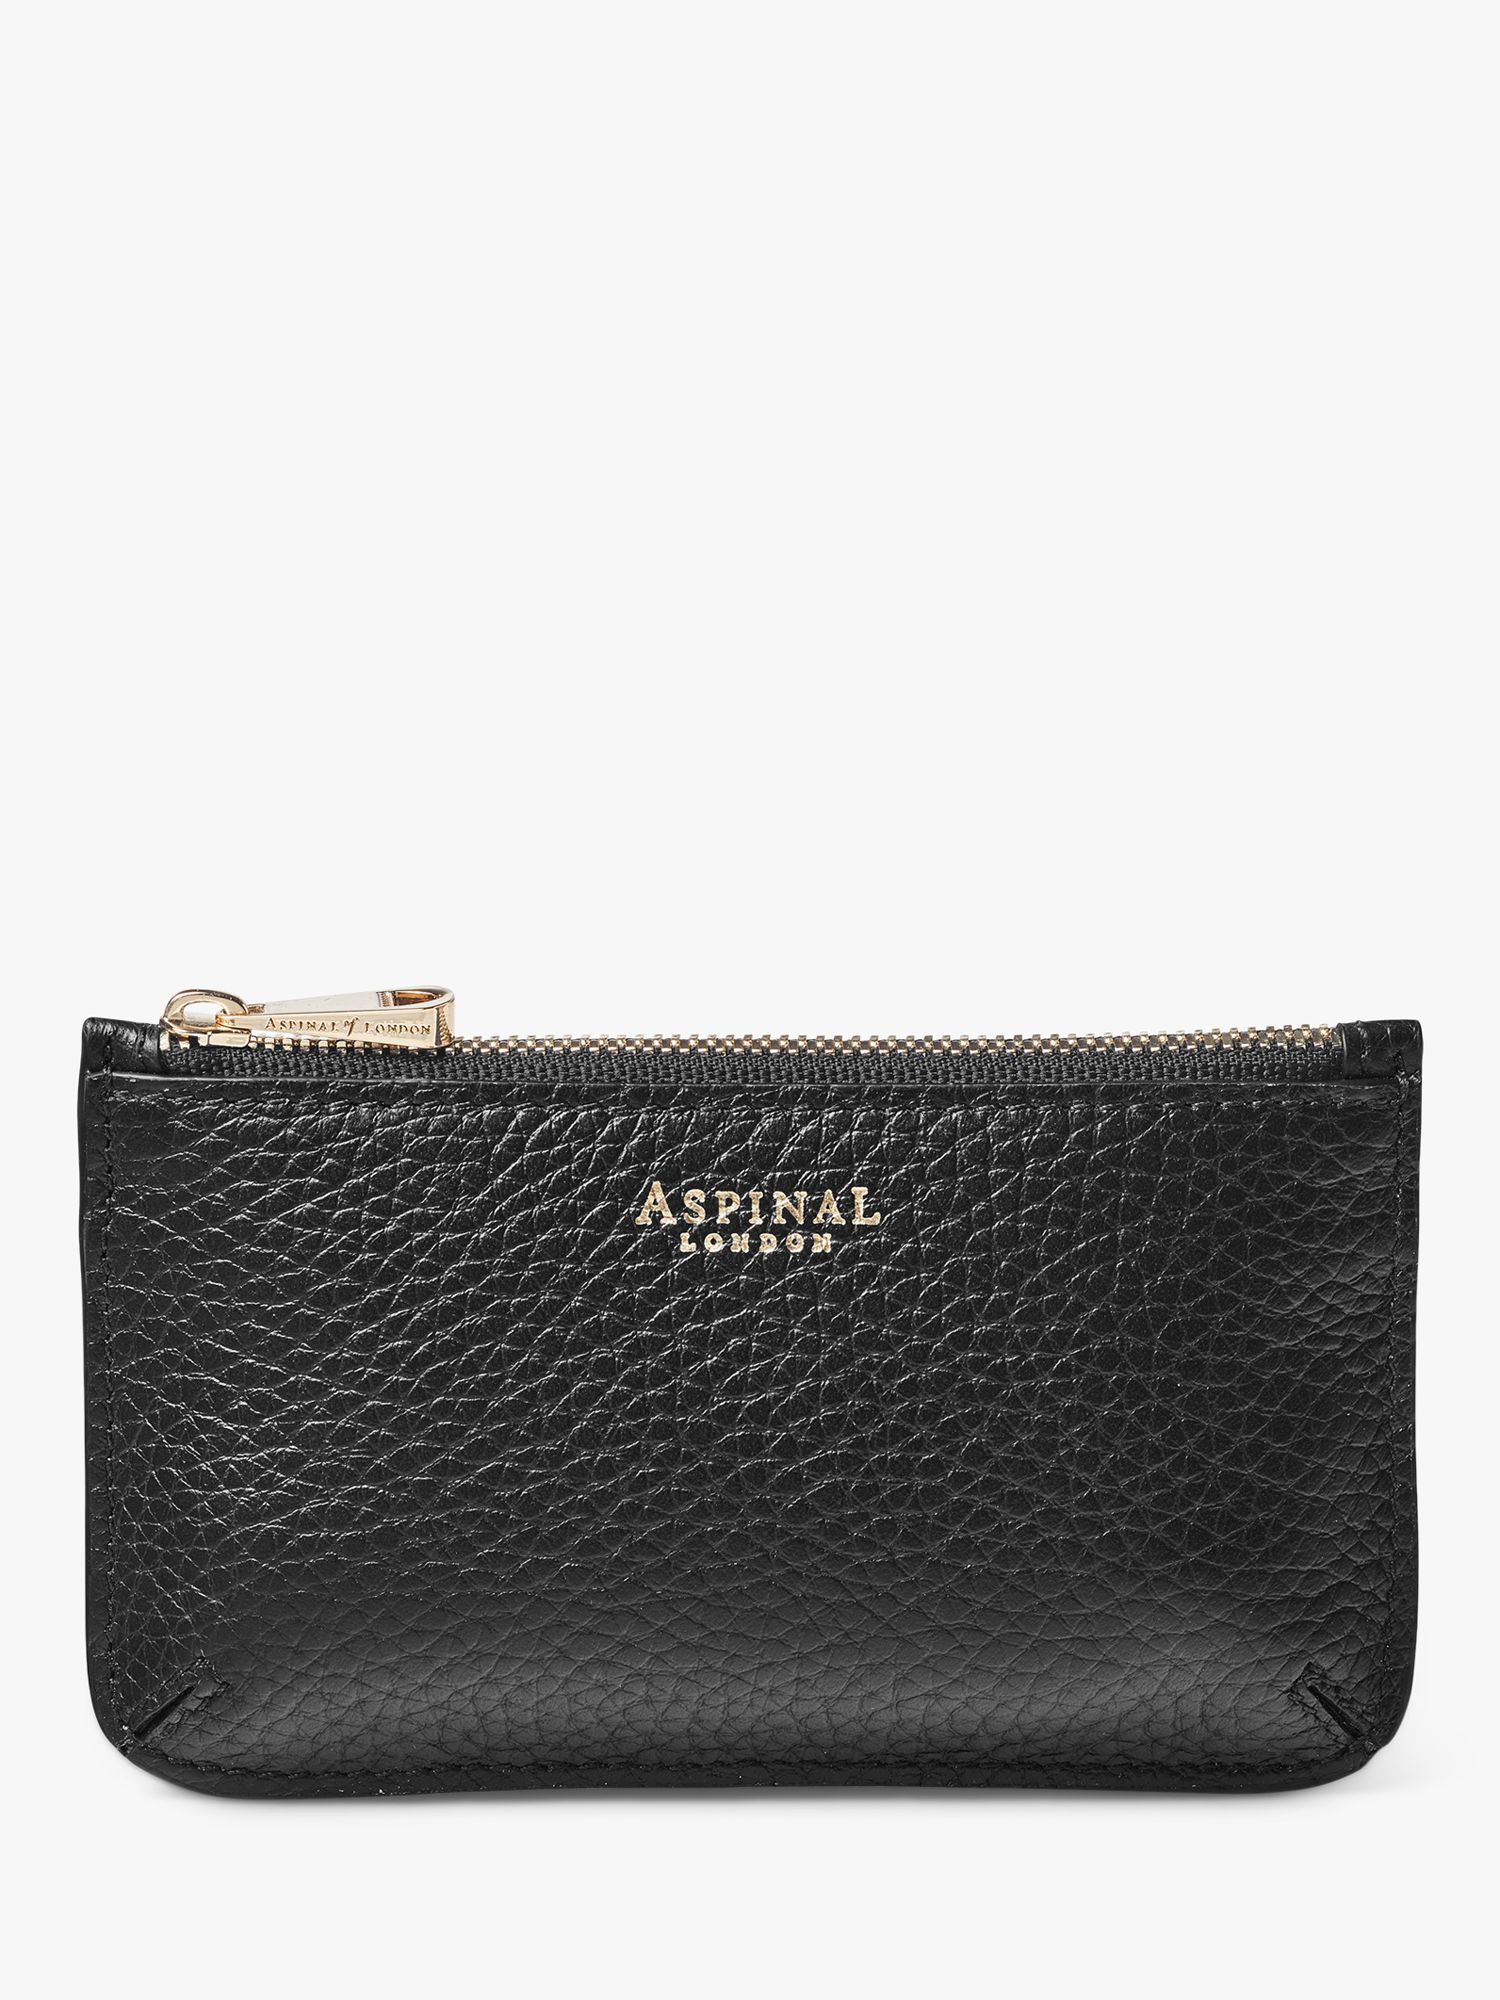 Buy Aspinal of London Ella Pebble Grain Leather Card and Coin Holder Online at johnlewis.com